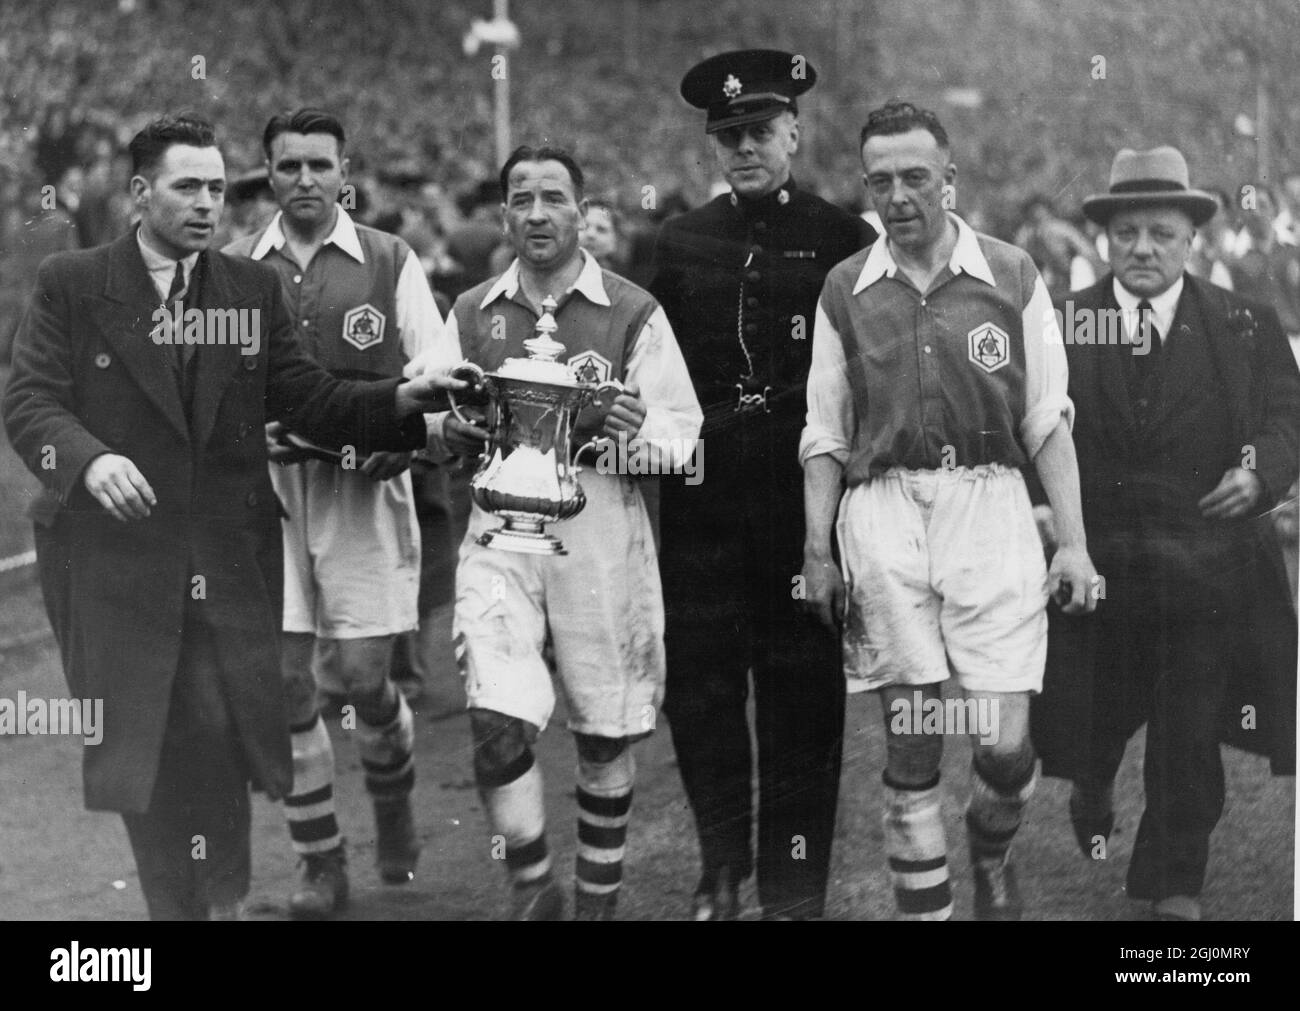 The Arsenal team after winning the 1936 FA Cup Final against Sheffield United at Wembley Stadium , London , England . Alex James carries the cup . 25 April 1936 Stock Photo